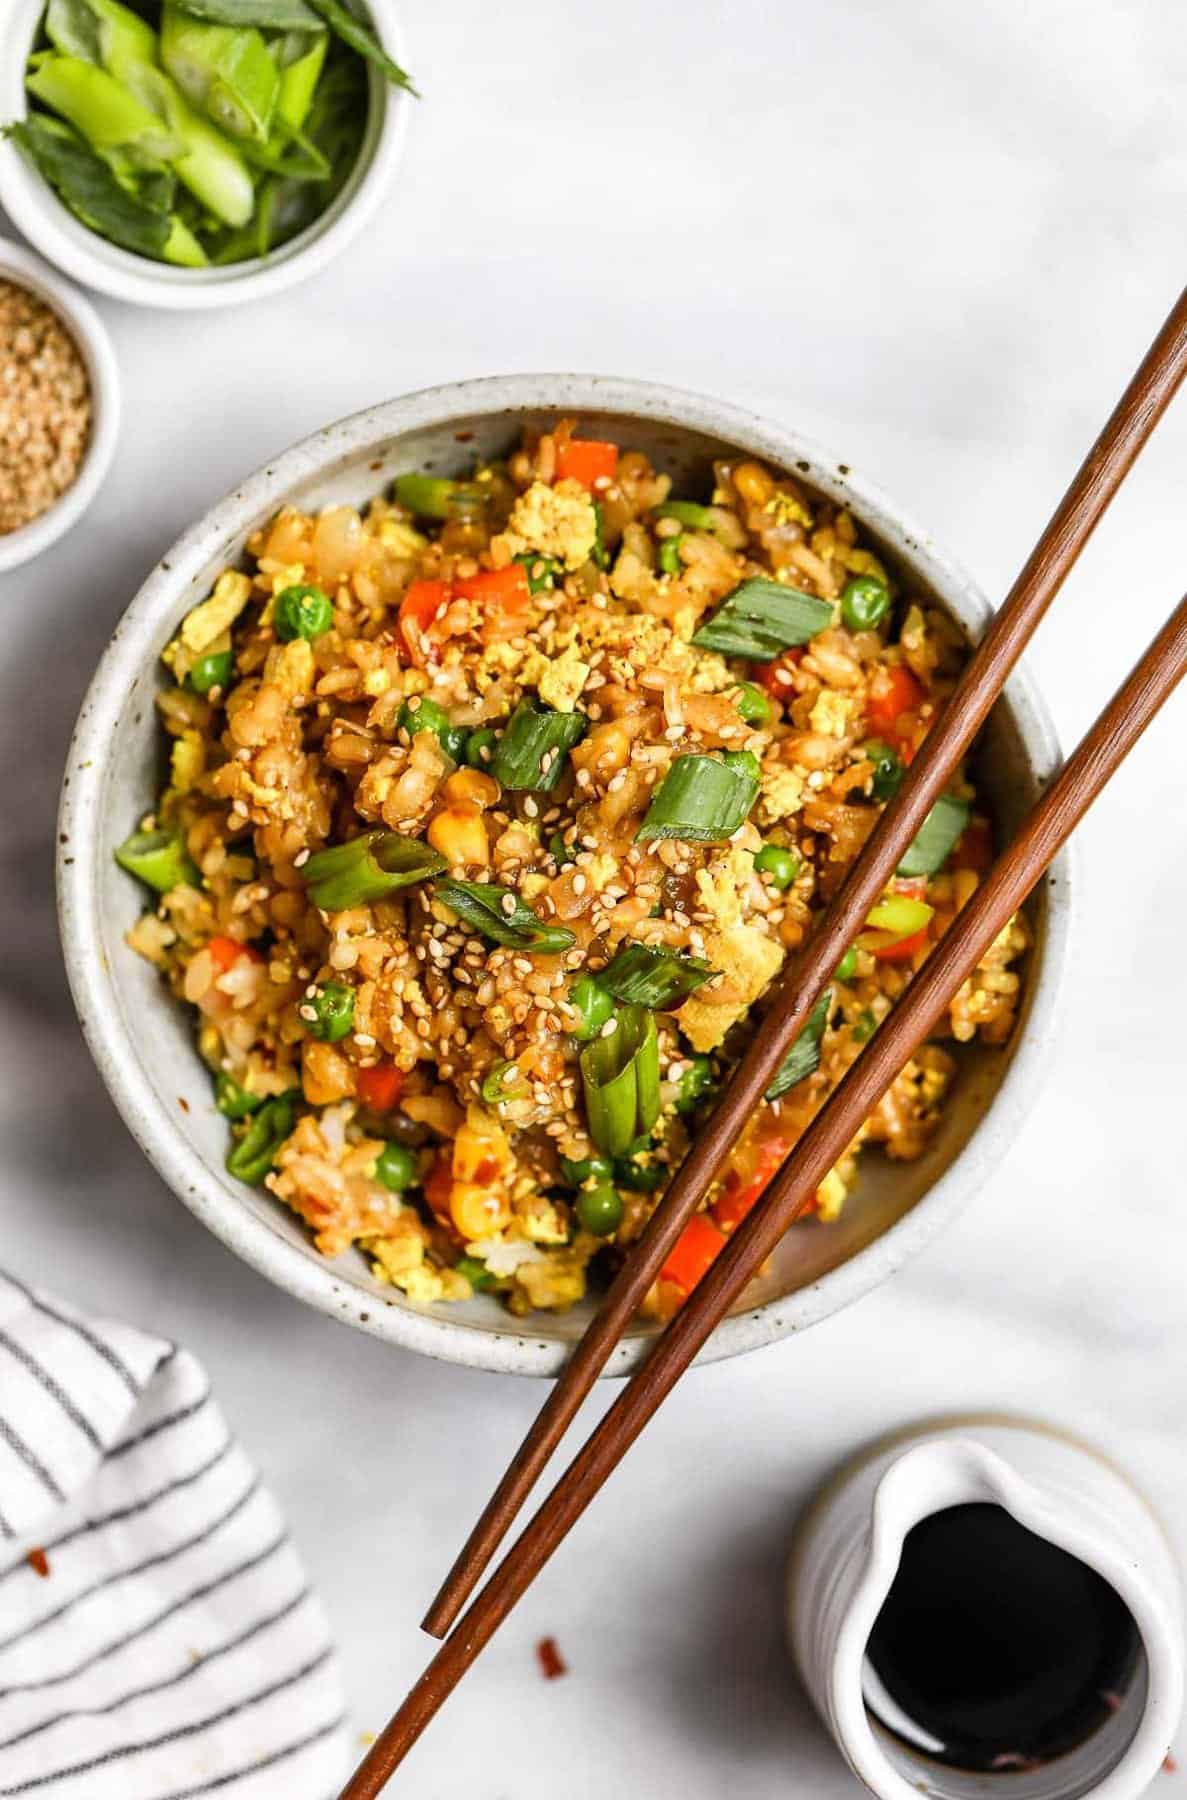 One bowl of vegan fried rice with chopsticks on the top.